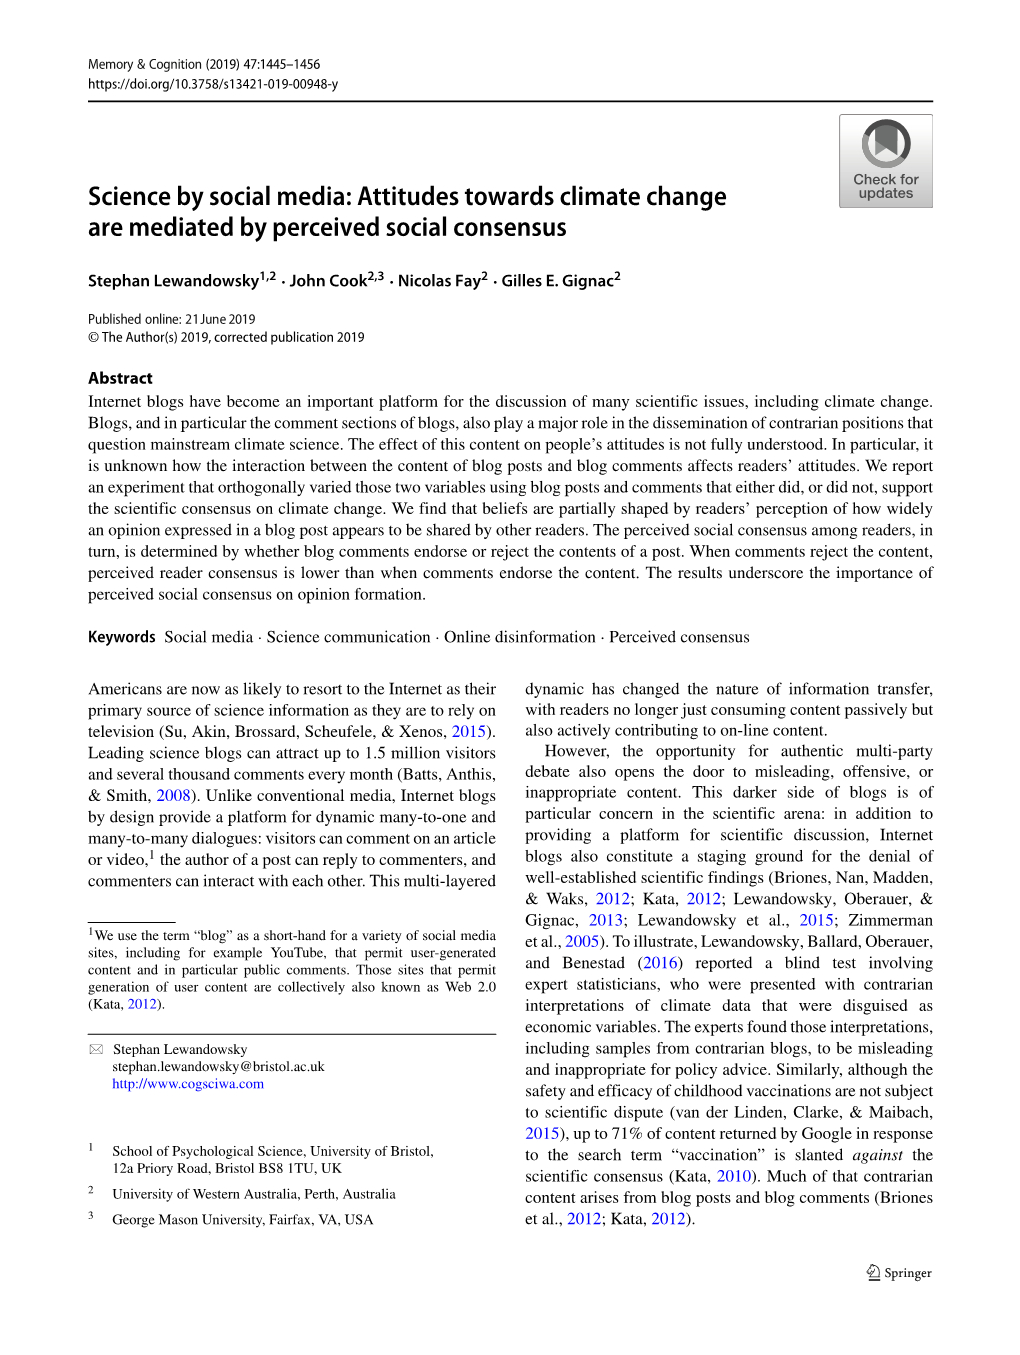 Attitudes Towards Climate Change Are Mediated by Perceived Social Consensus